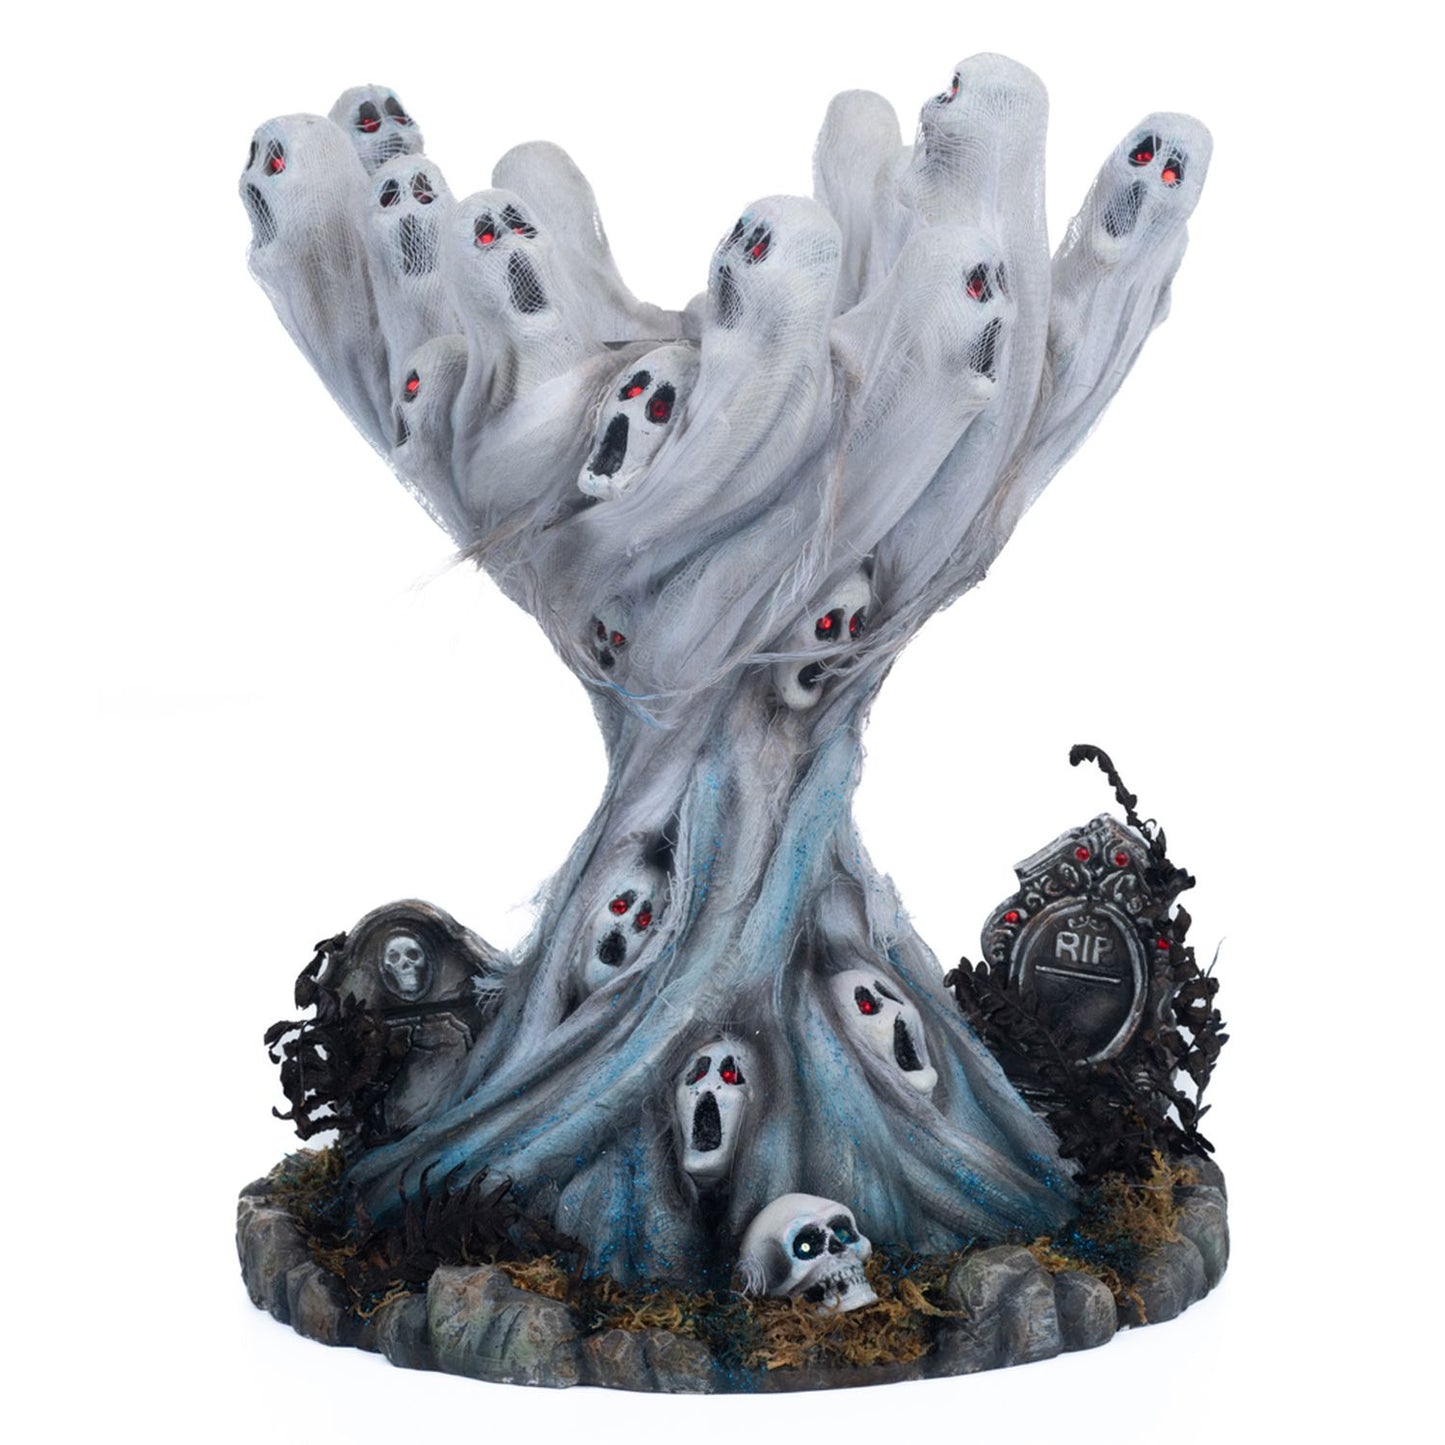 Katherine's Collection Seers & Takers 12" Lost Souls Pillar Candle Holder, White